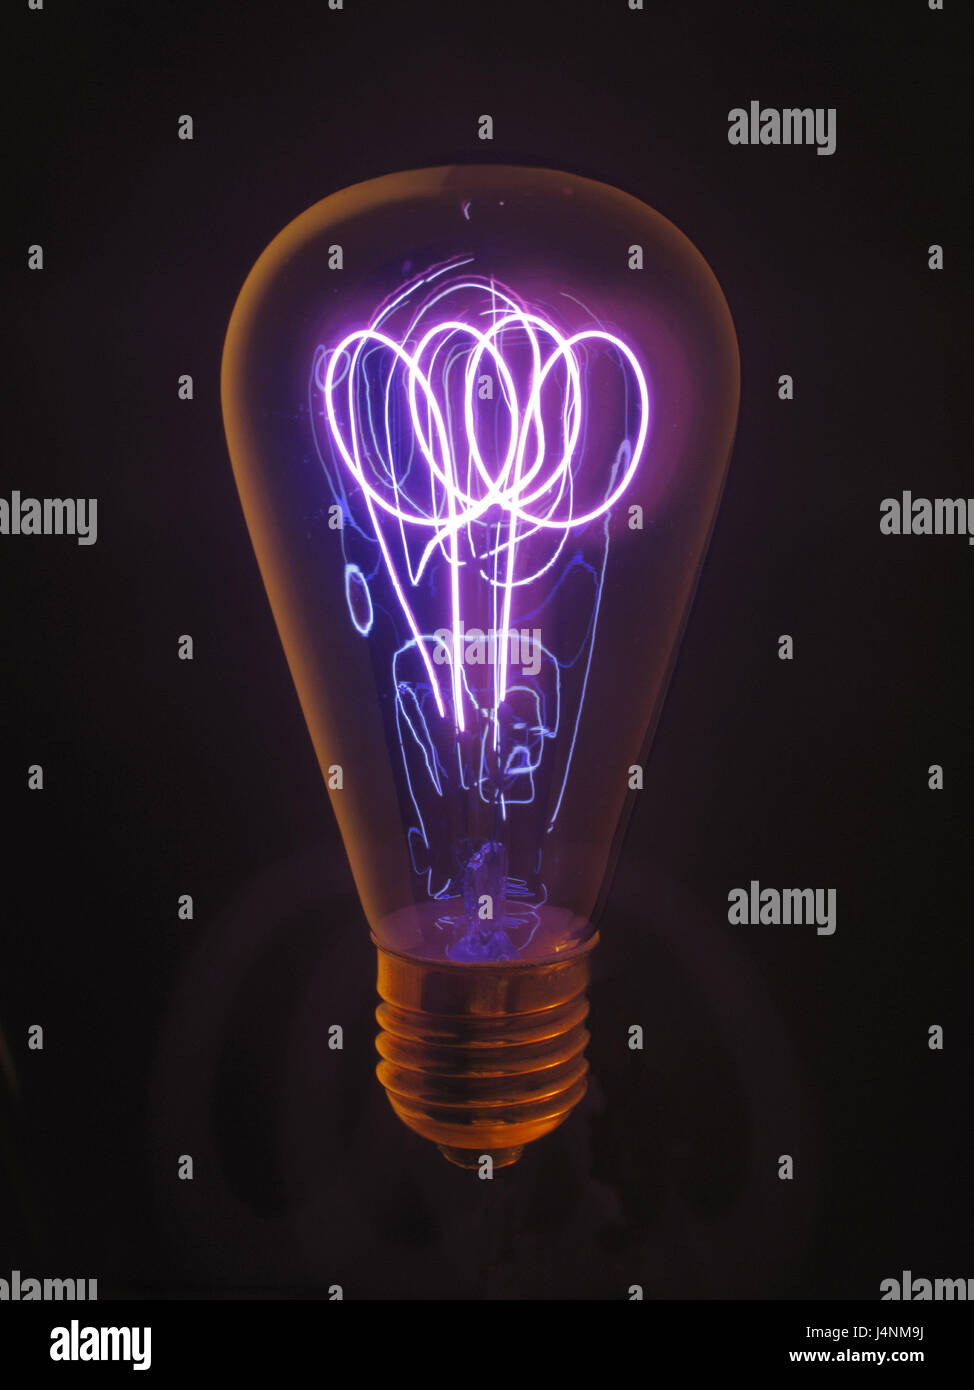 Light bulb, wire, shine, blast energy, electricity, electrically, light, technology, lamp, brightness, current, power consumption, filament, glow wire, studio, Stock Photo